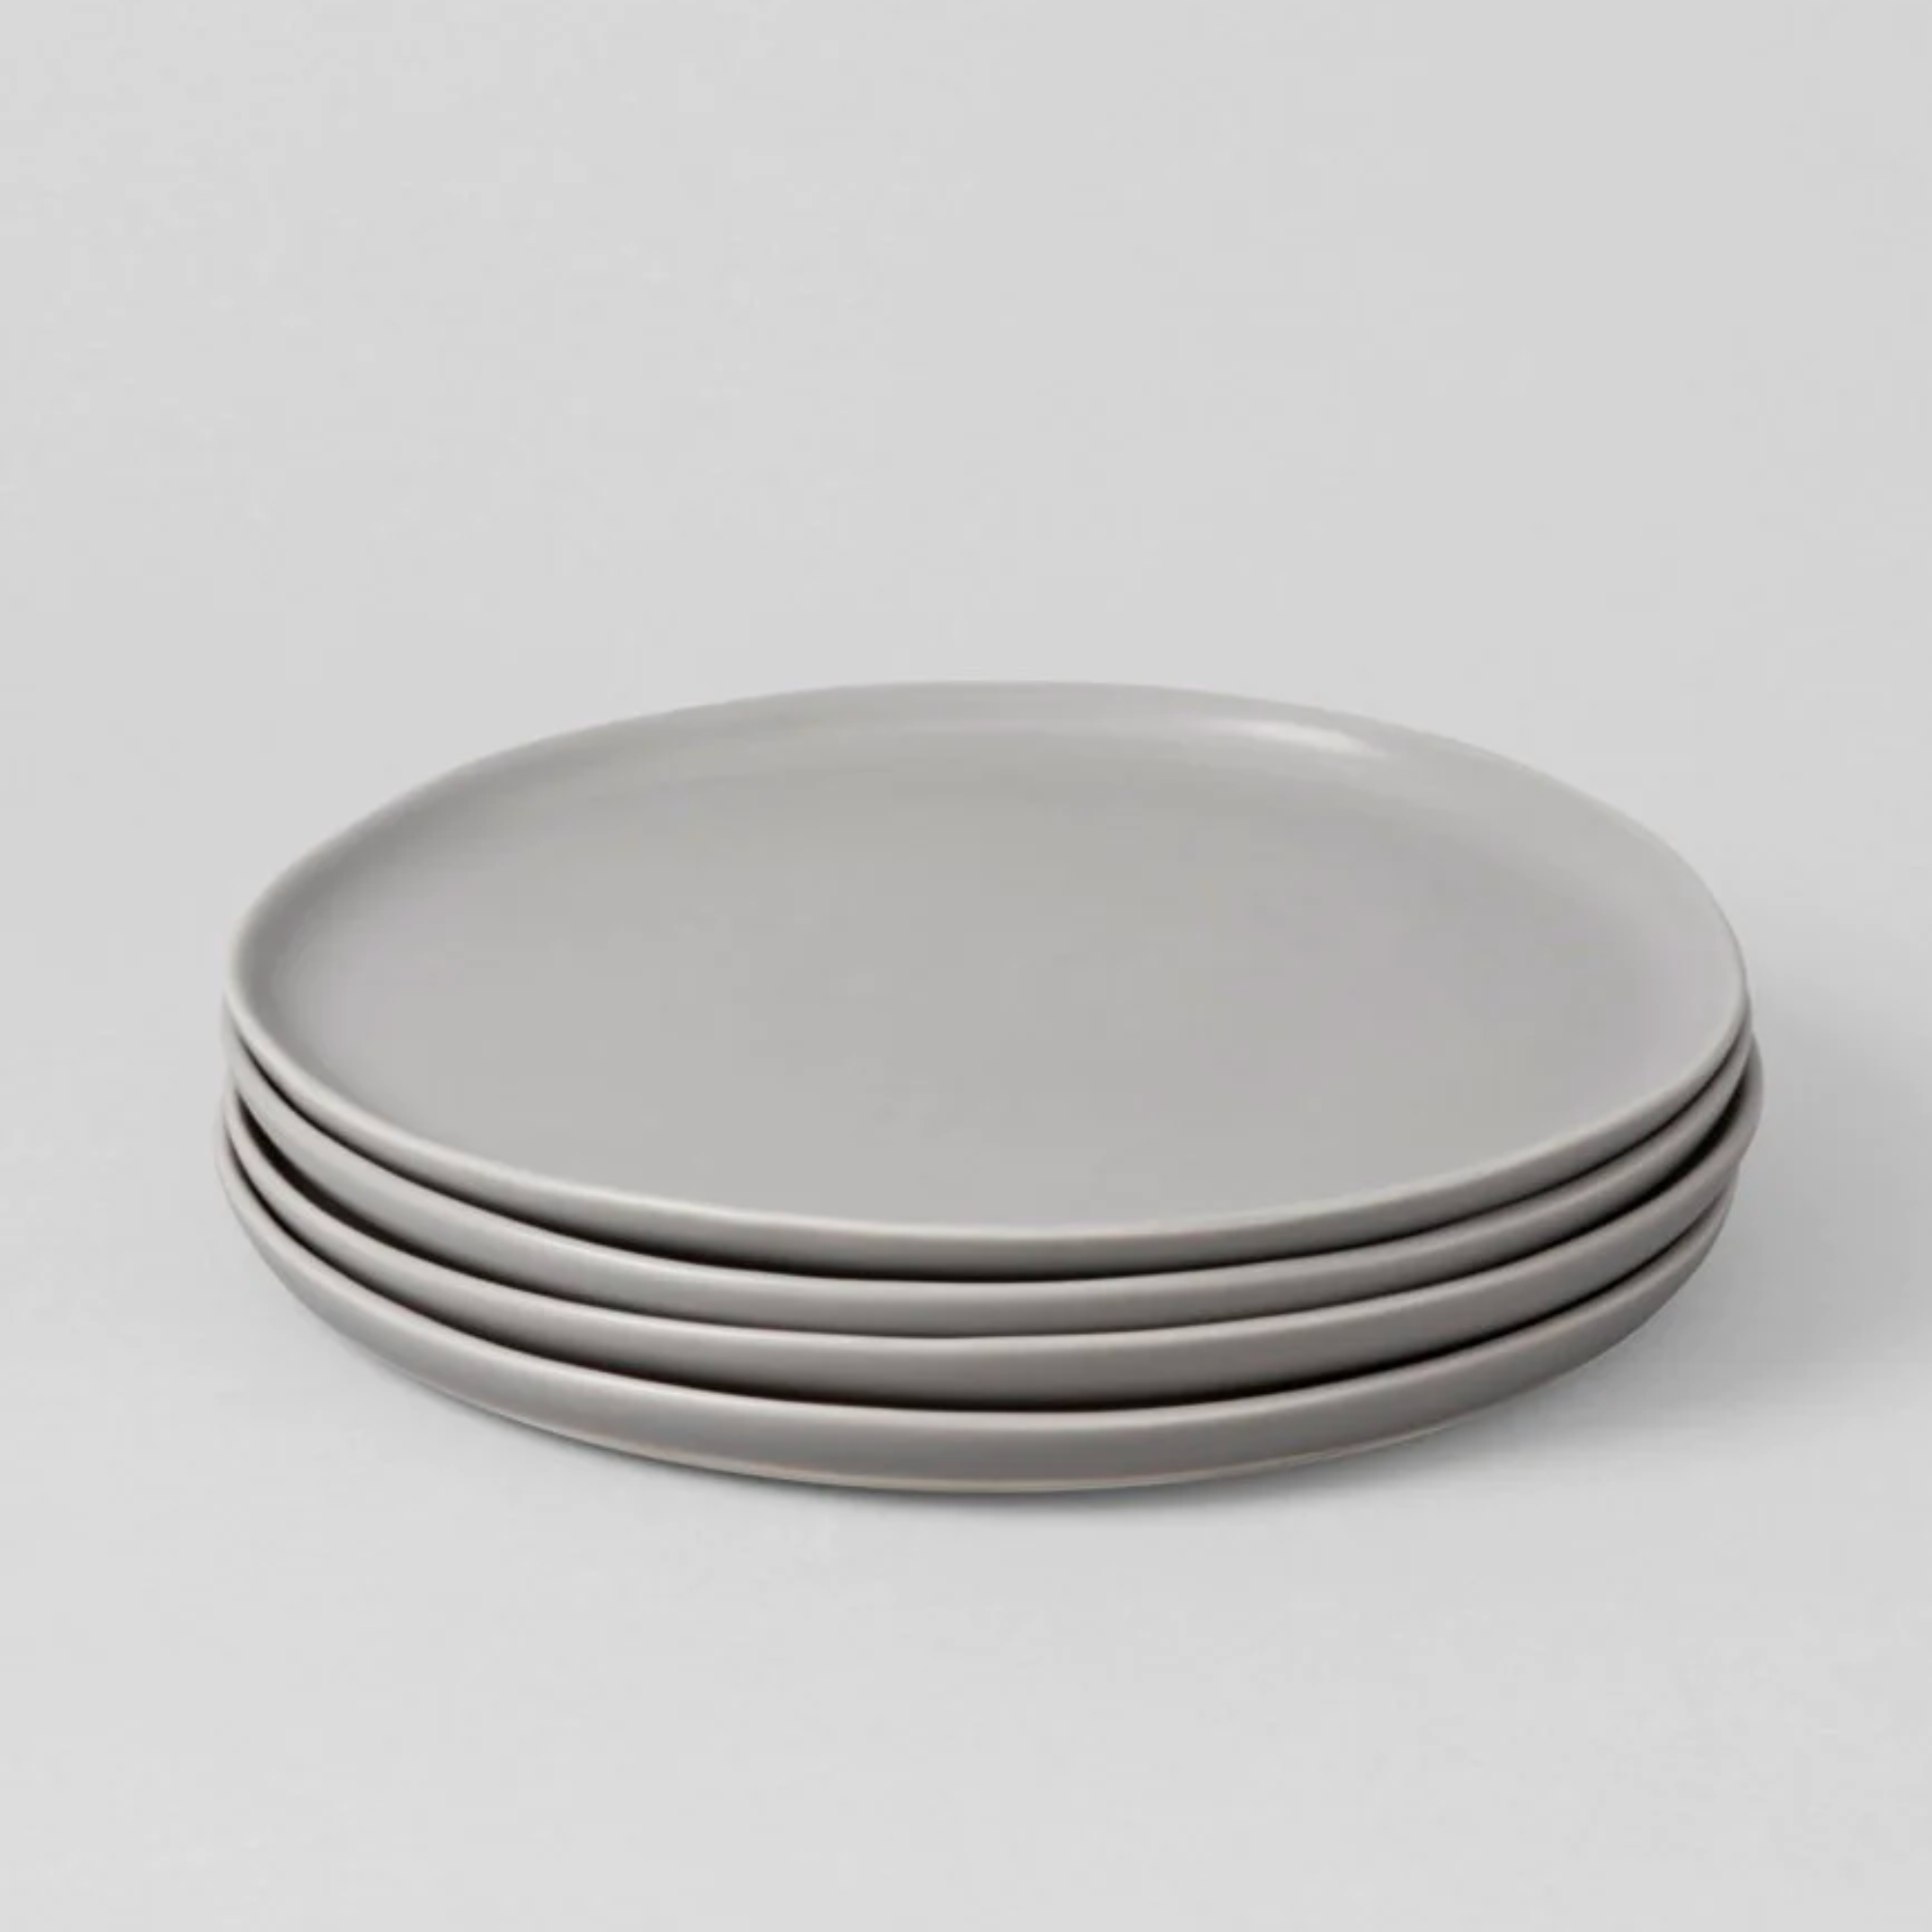 Fable Dinner Plates